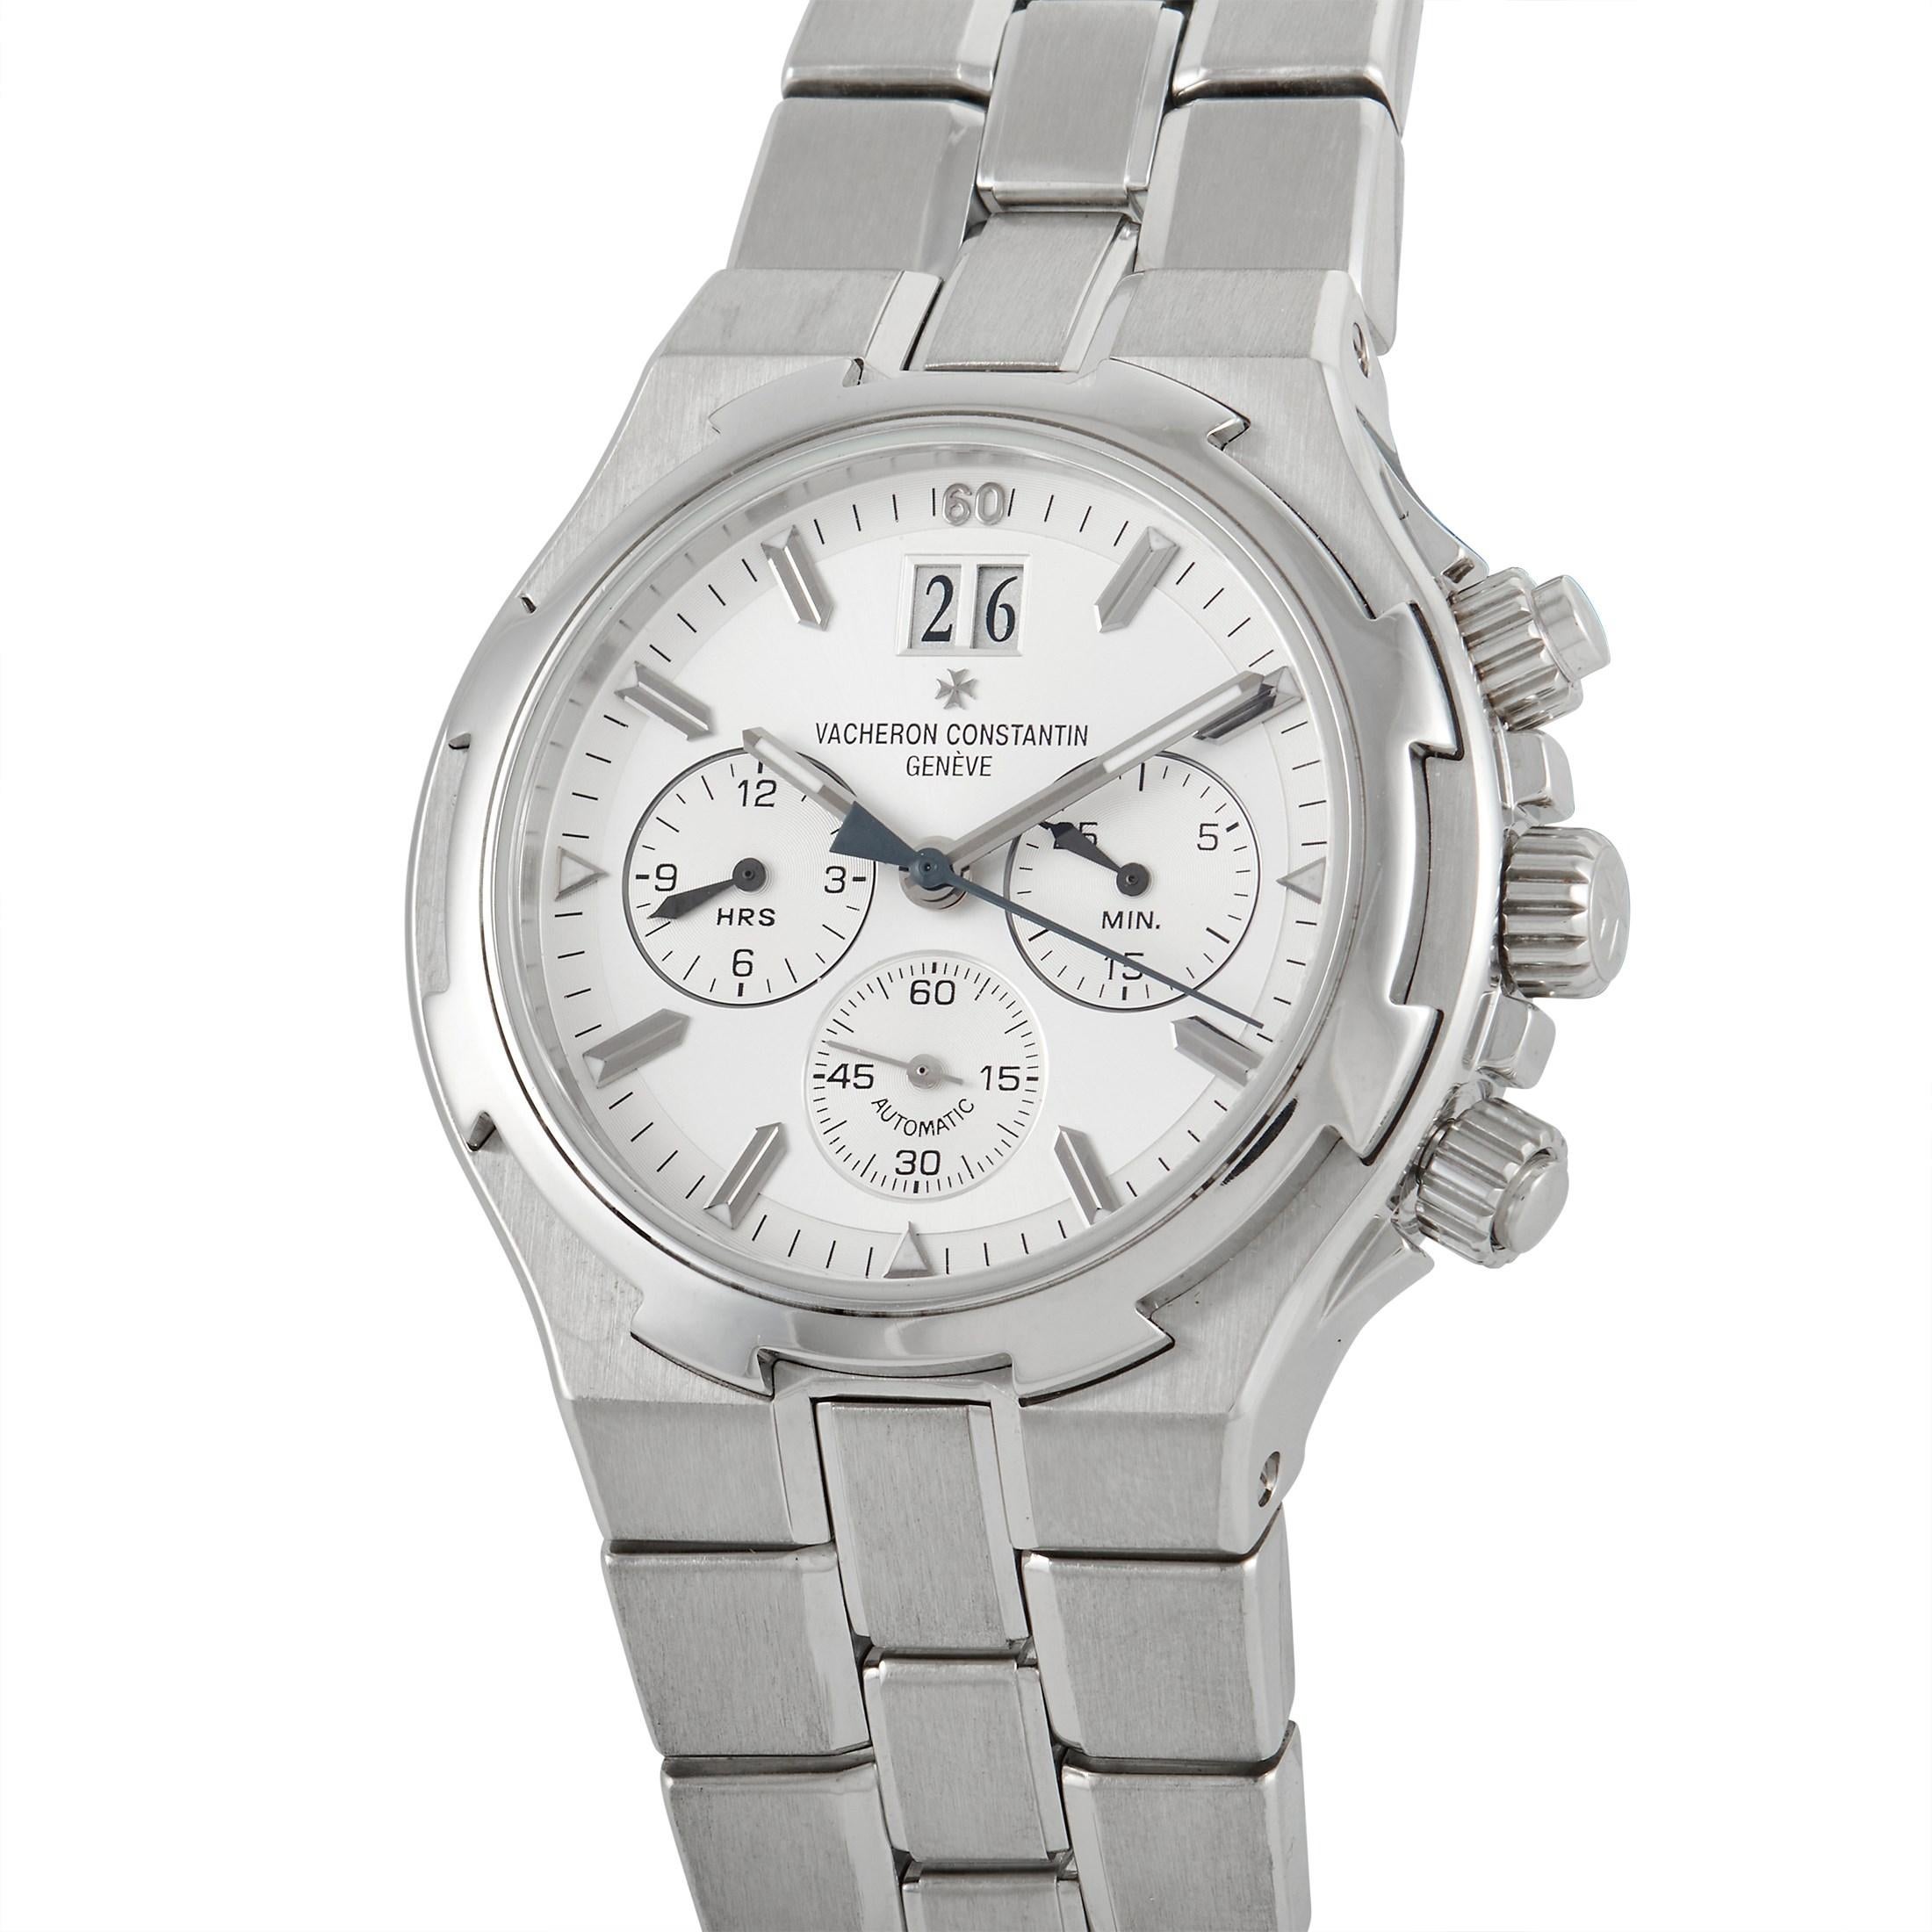 The Vacheron Constantin Overseas Chronograph Watch, reference number 49140, is a luxury timepiece with a sleek, sophisticated sense of style.

This impeccable accessory features a 42mm case, bezel, and bracelet made from shimmering stainless steel.